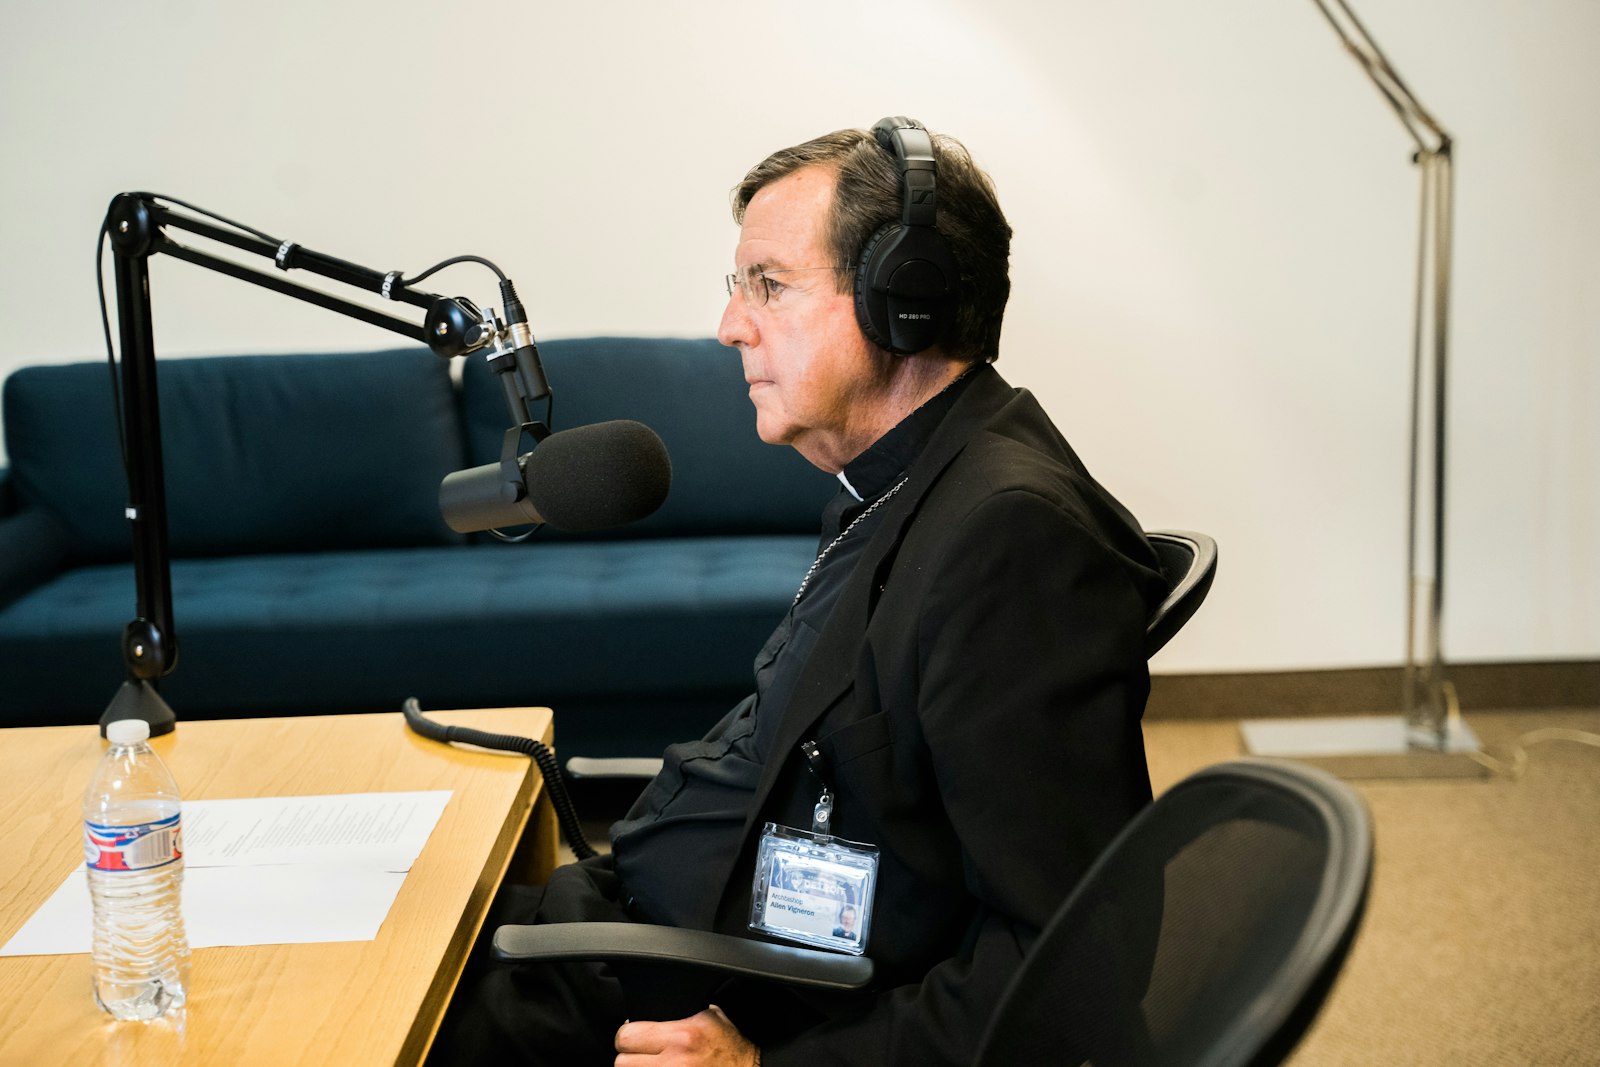 Archbishop Vigneron also stressed the need for robust communications – appropriately enough, on his own podcast – one of seven the Archdiocese of Detroit now sponsors along with the content it posts on various social media platforms.